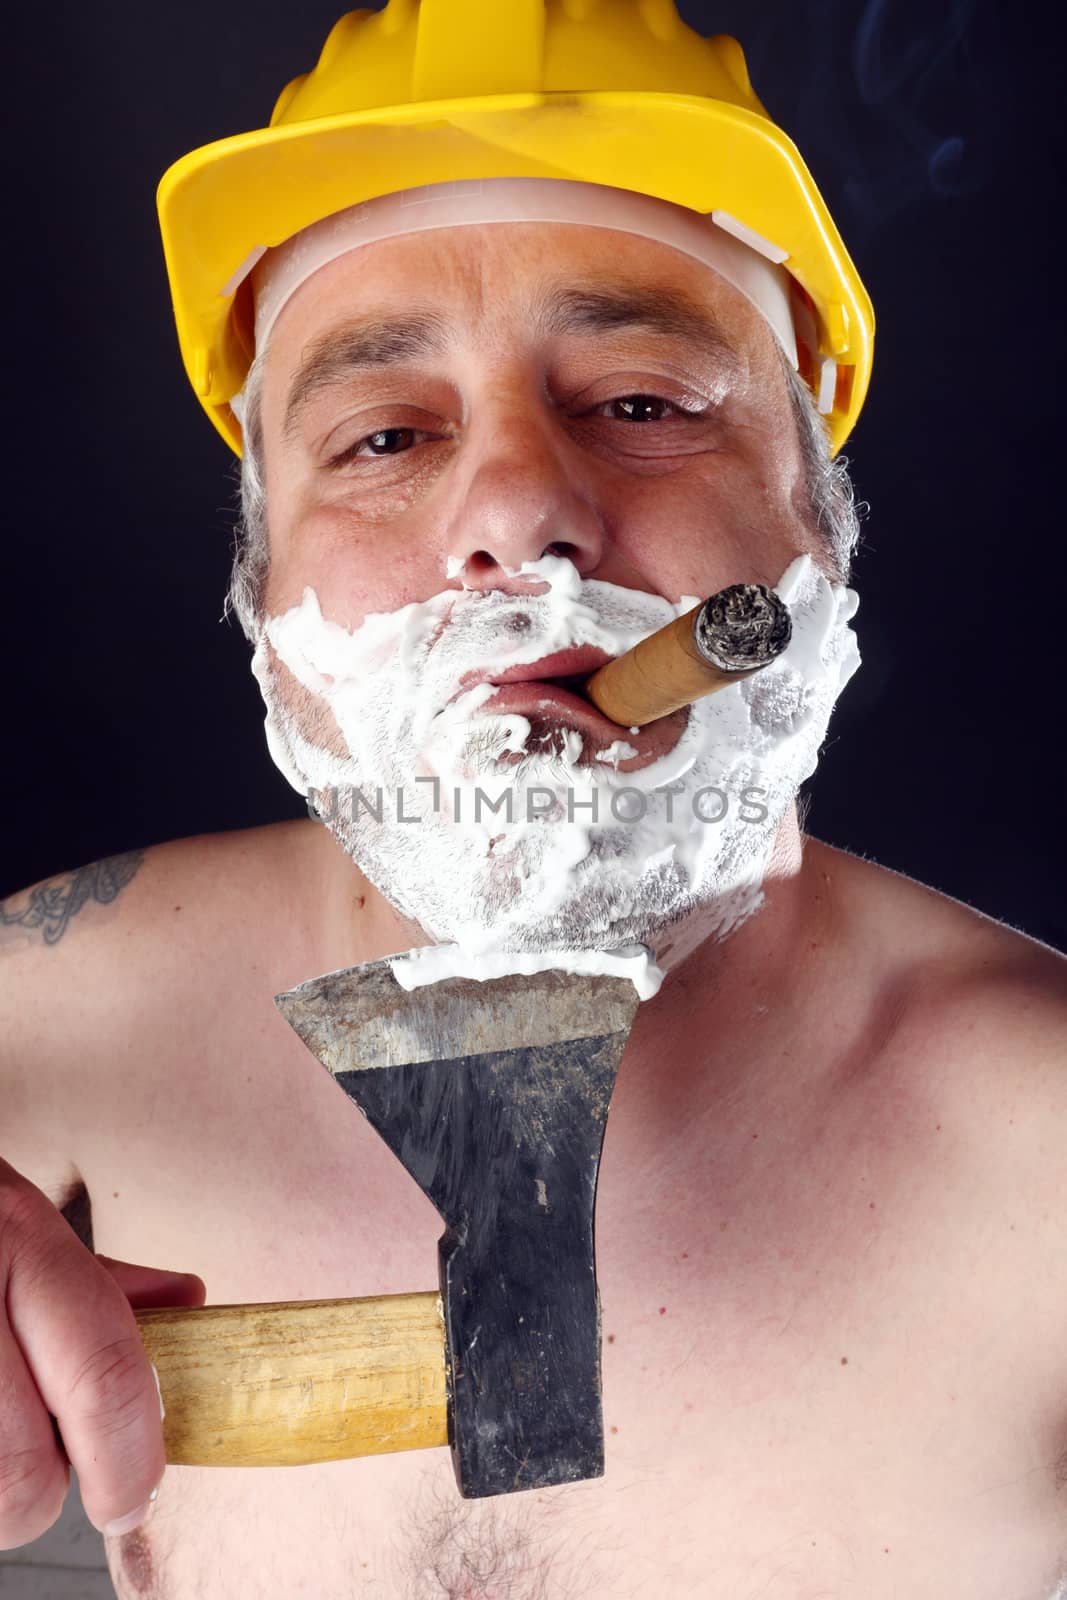 man with helmet and cigar shave himself with an ax